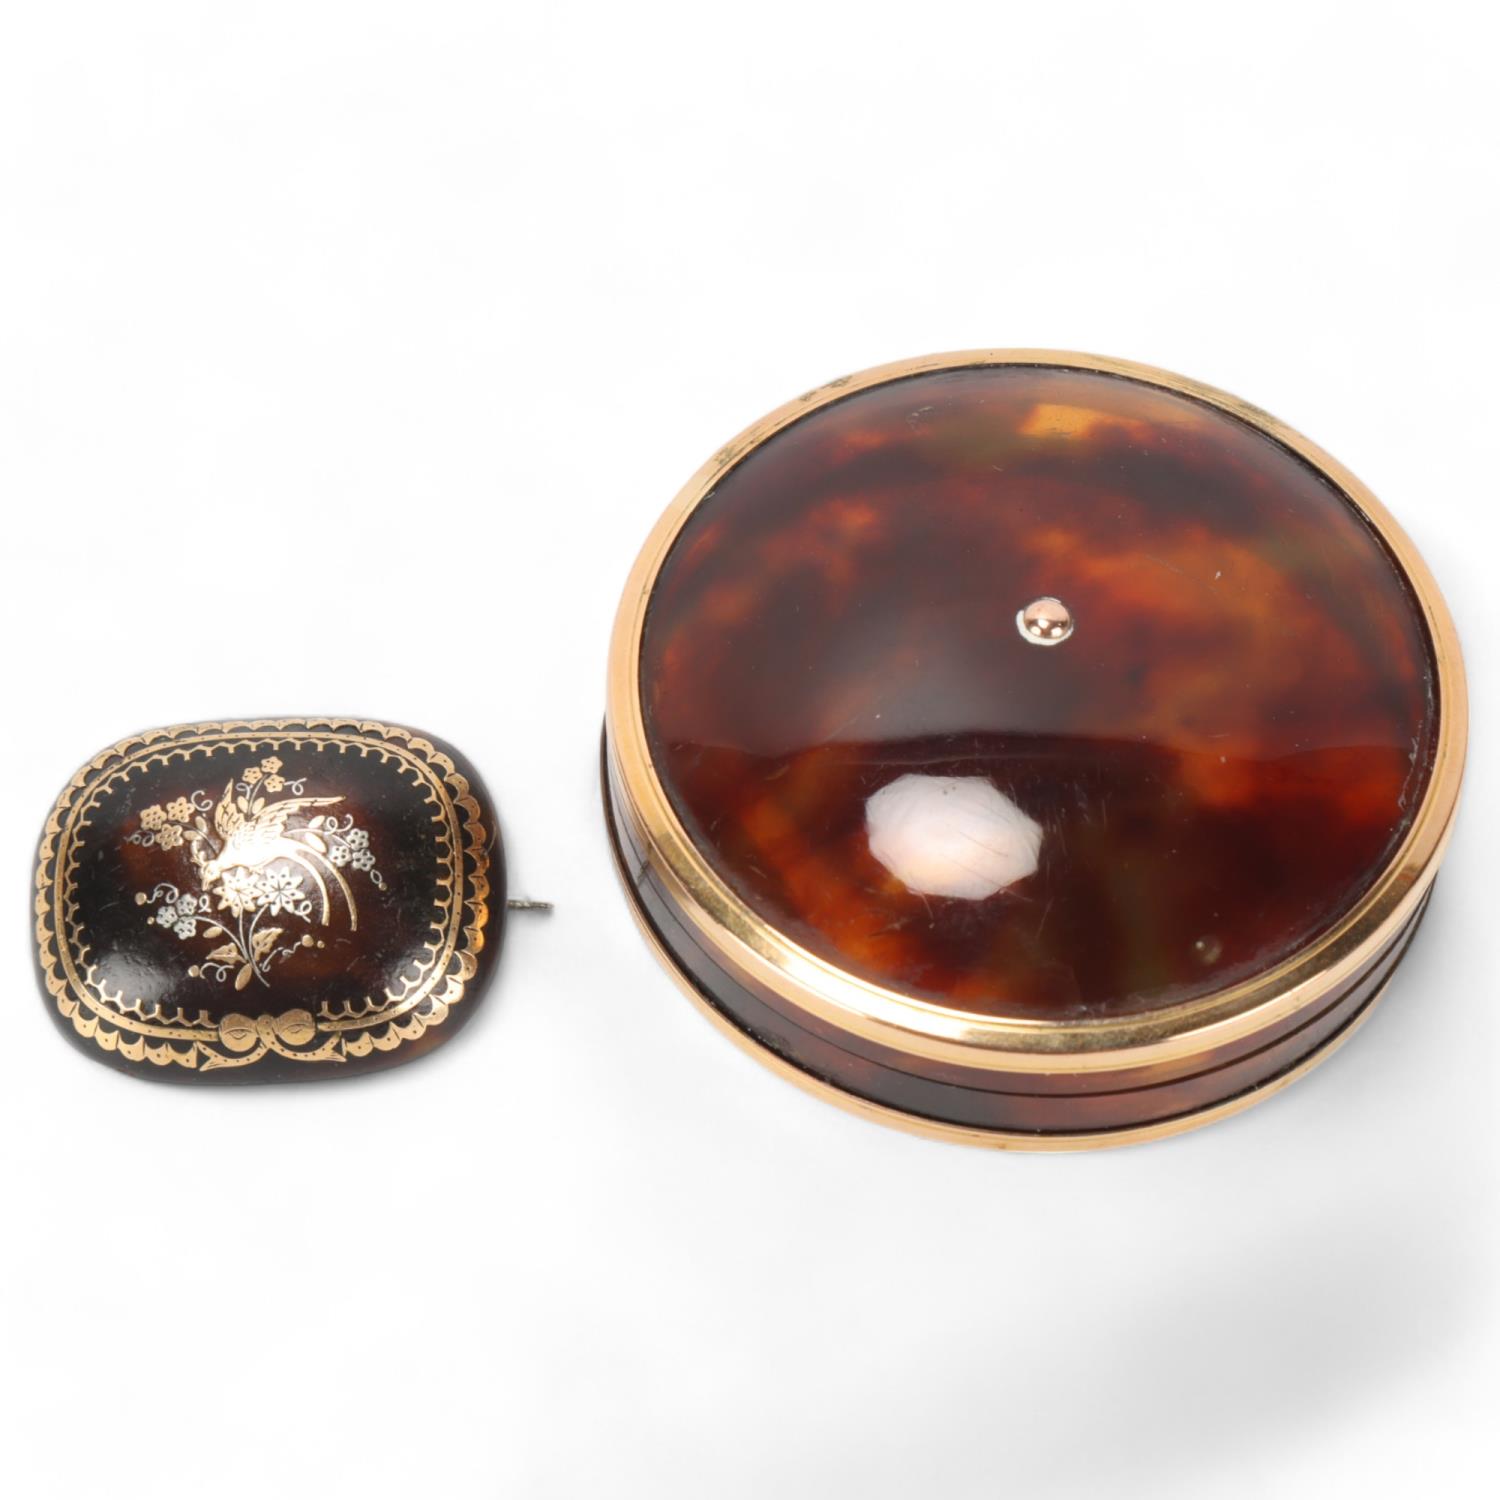 A 19th century circular tortoiseshell box with domed top and bottom, unmarked gilt-metal edges,